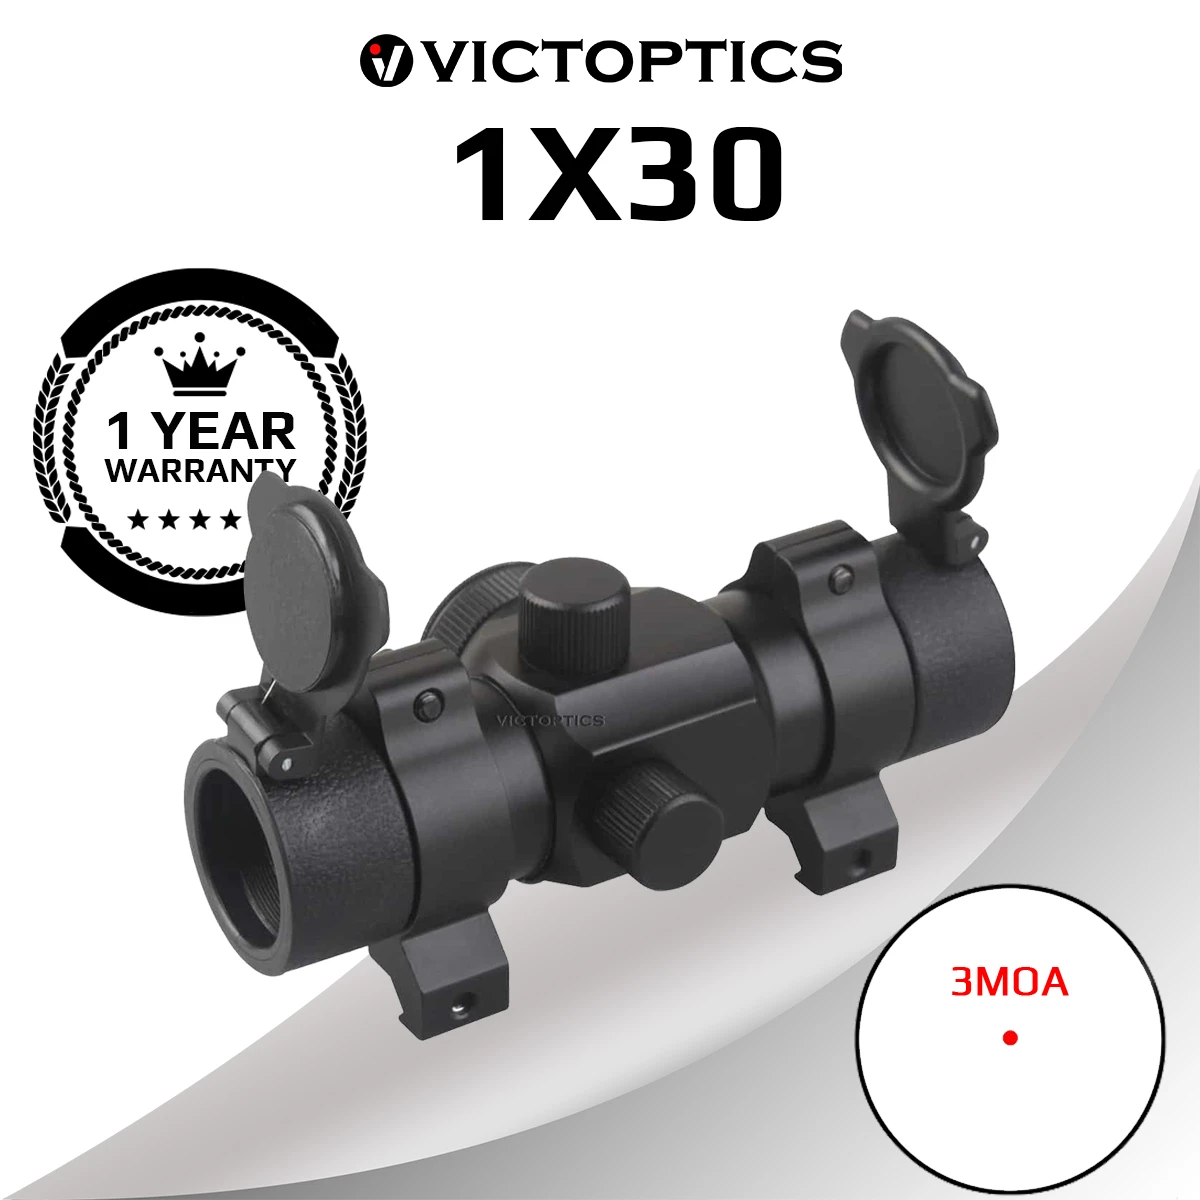 VictOptics Best 1x30 Hunting Shooting Red Dot Scope Collimator Sight Riflescope Reflex Optic Fits .223 5.56mm Firarms & Airsoft